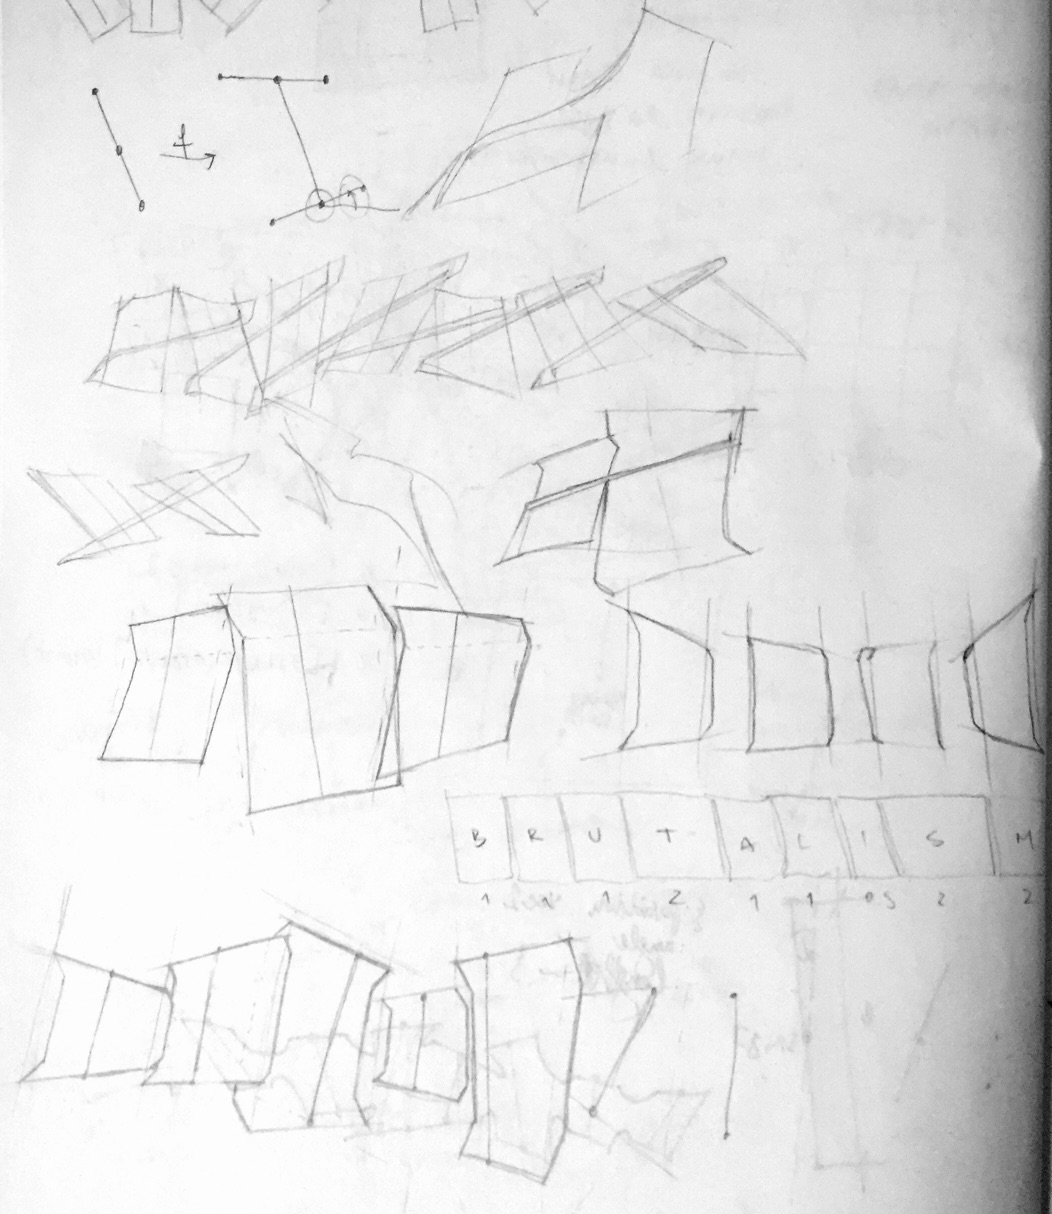 In these initial sketches, I wanted to capture the flow of letters and their mutual positioning and stance.